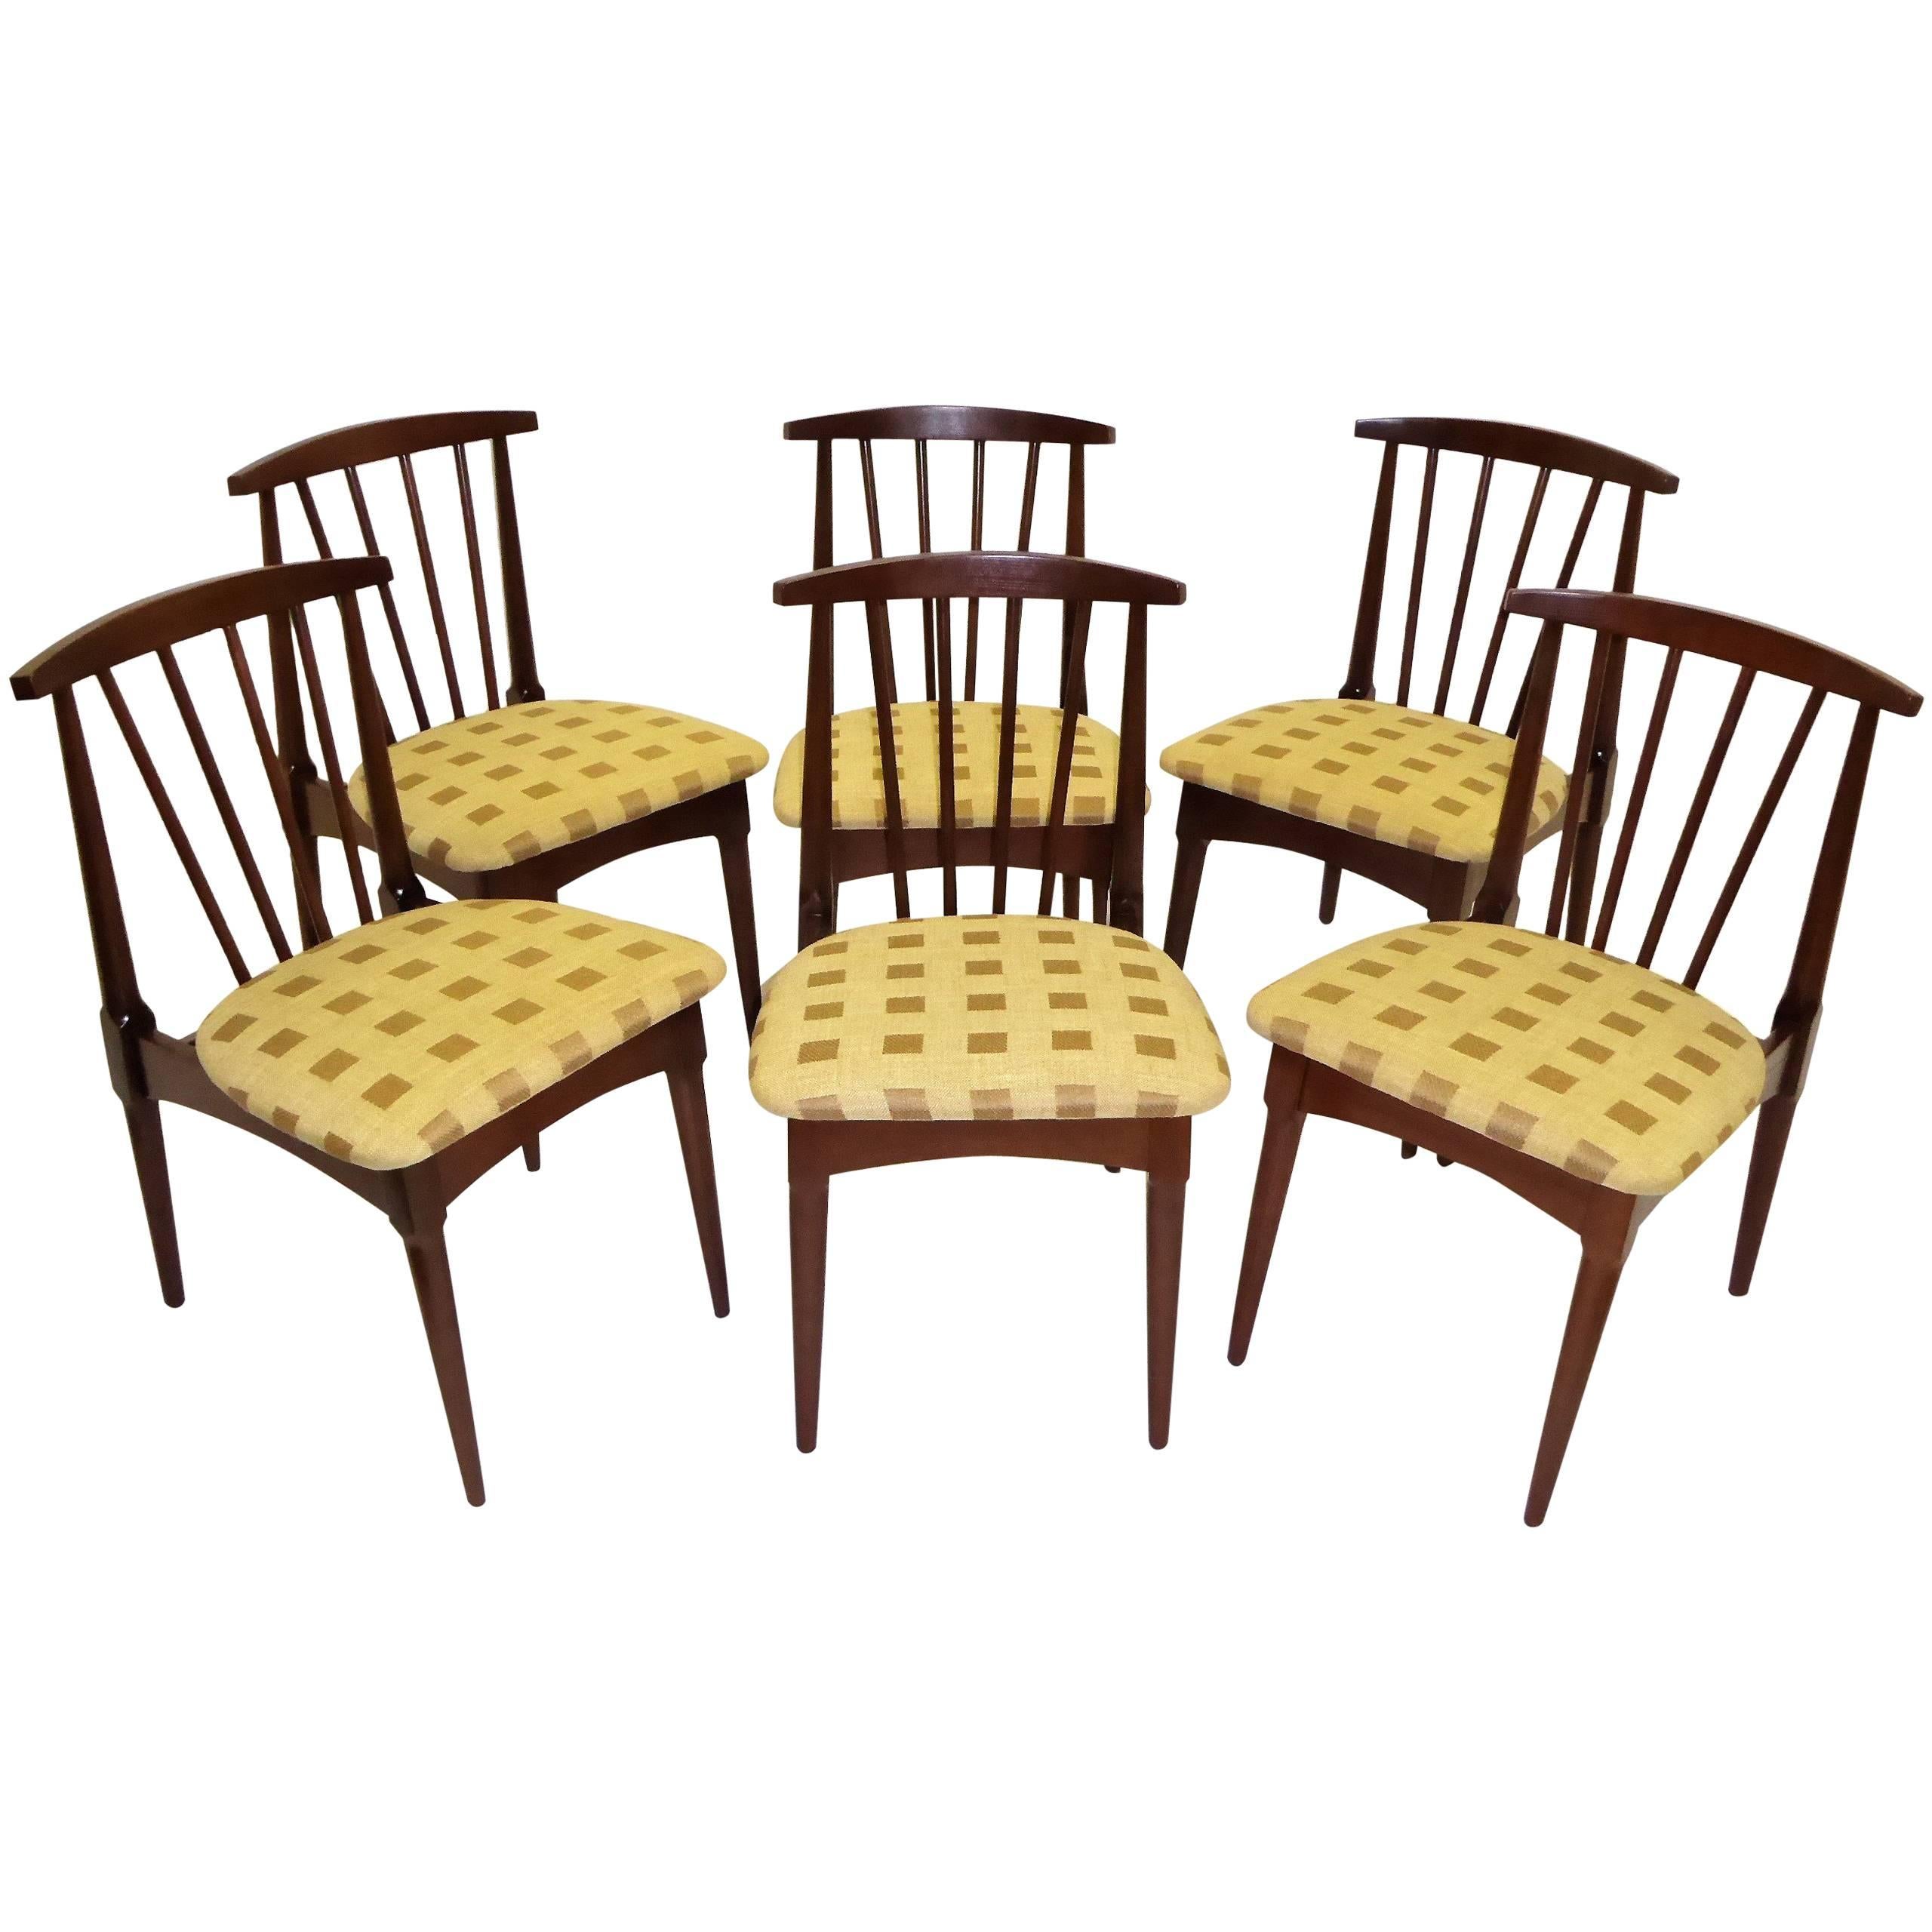 Six 1950s Danish Modern Style Walnut Spindle Back Dining Chairs